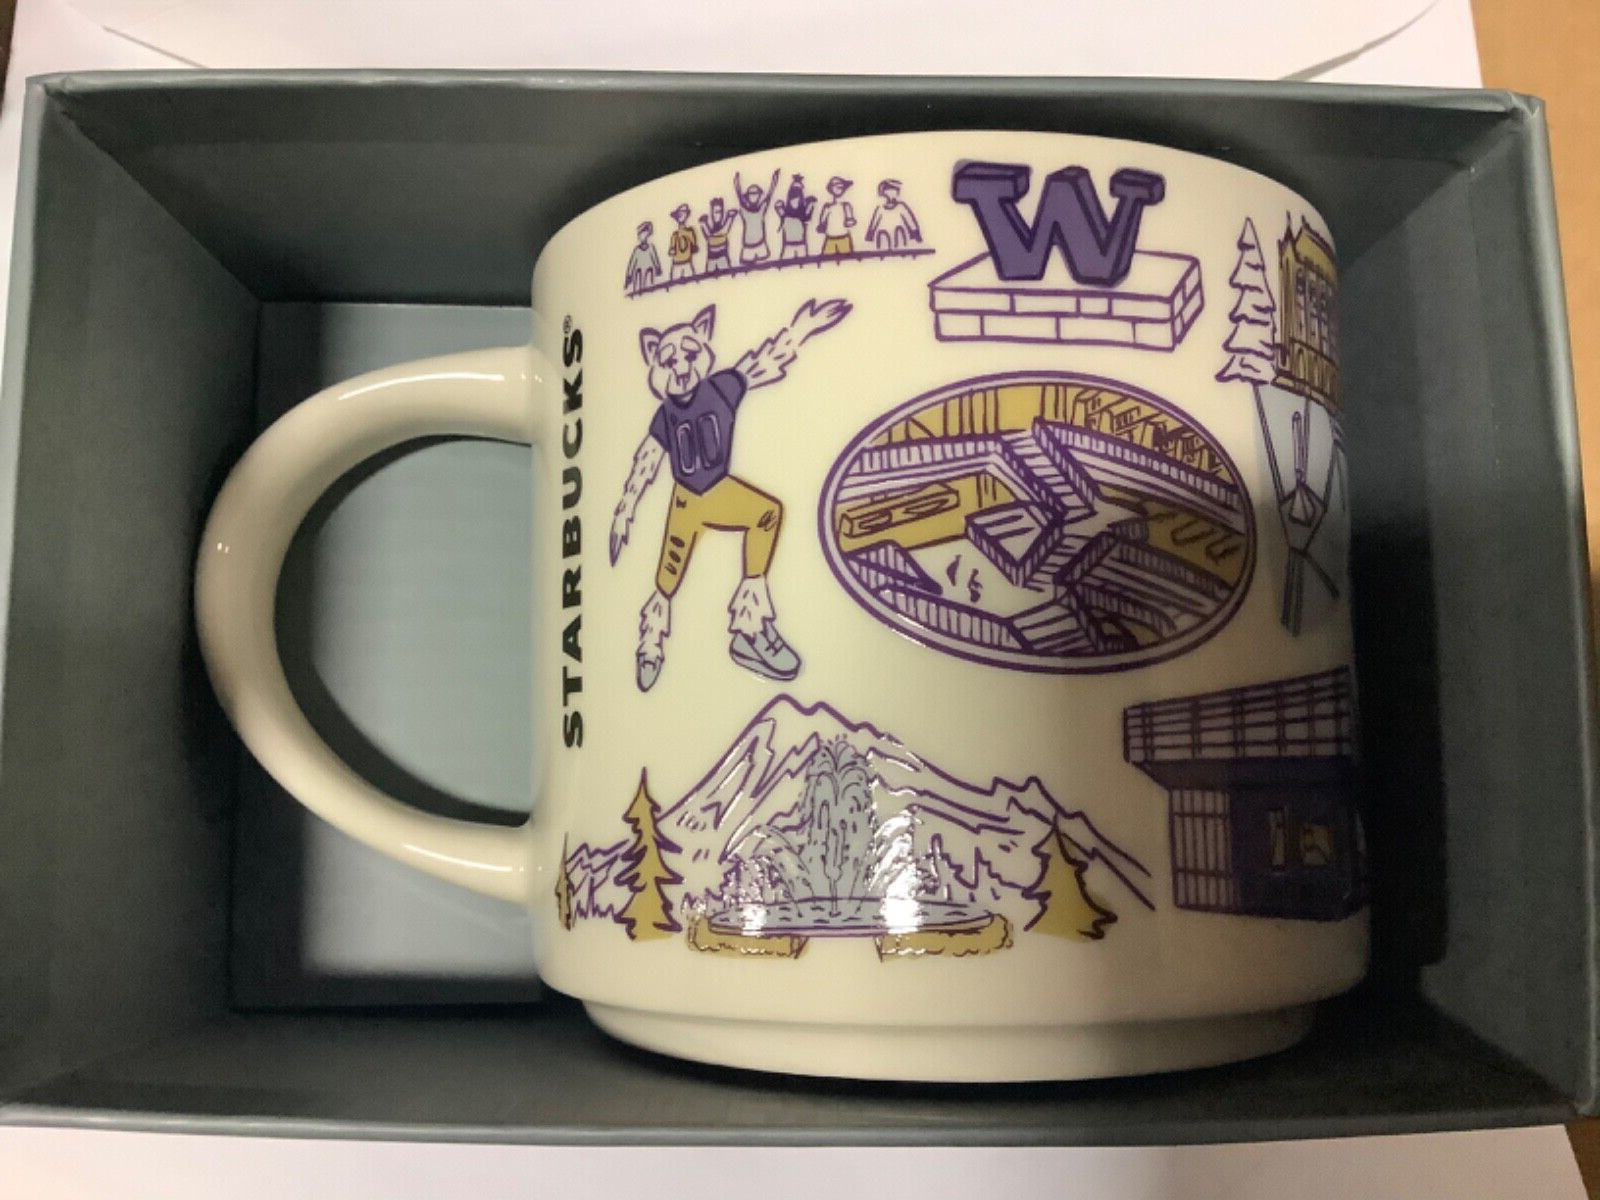 Starbucks Been There Series Campus Collection University of Washinton Mug